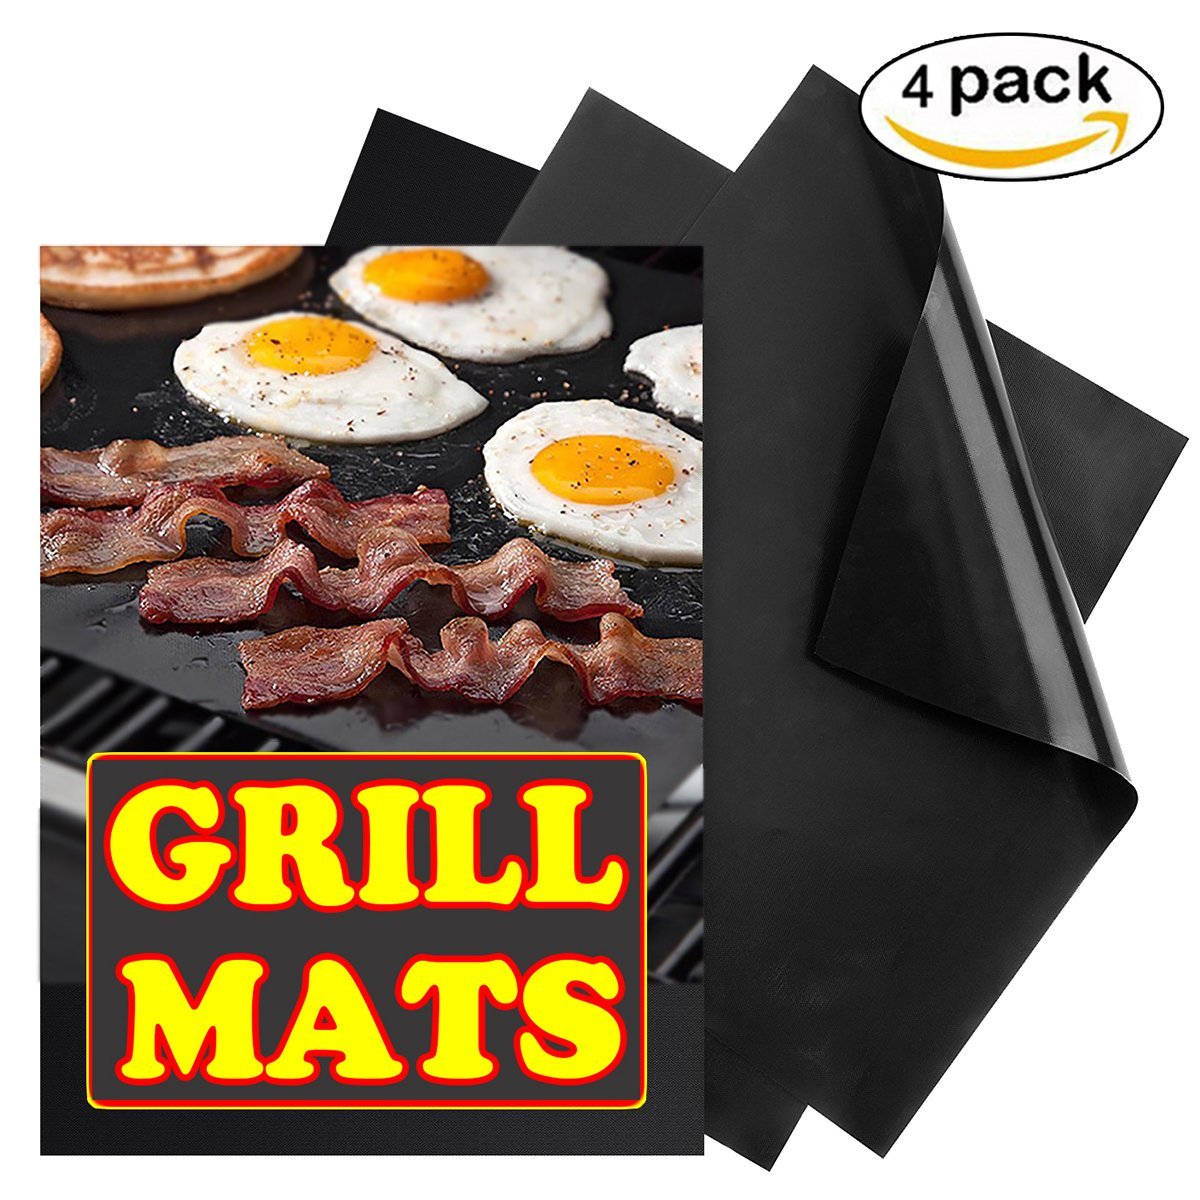 MODANU Grill Mats Set of 4 Non Stick BBQ Grill Mats Use on Gas, Charcoal, Electric Grill, 15.75 x 13 inch, Black - image 3 of 9